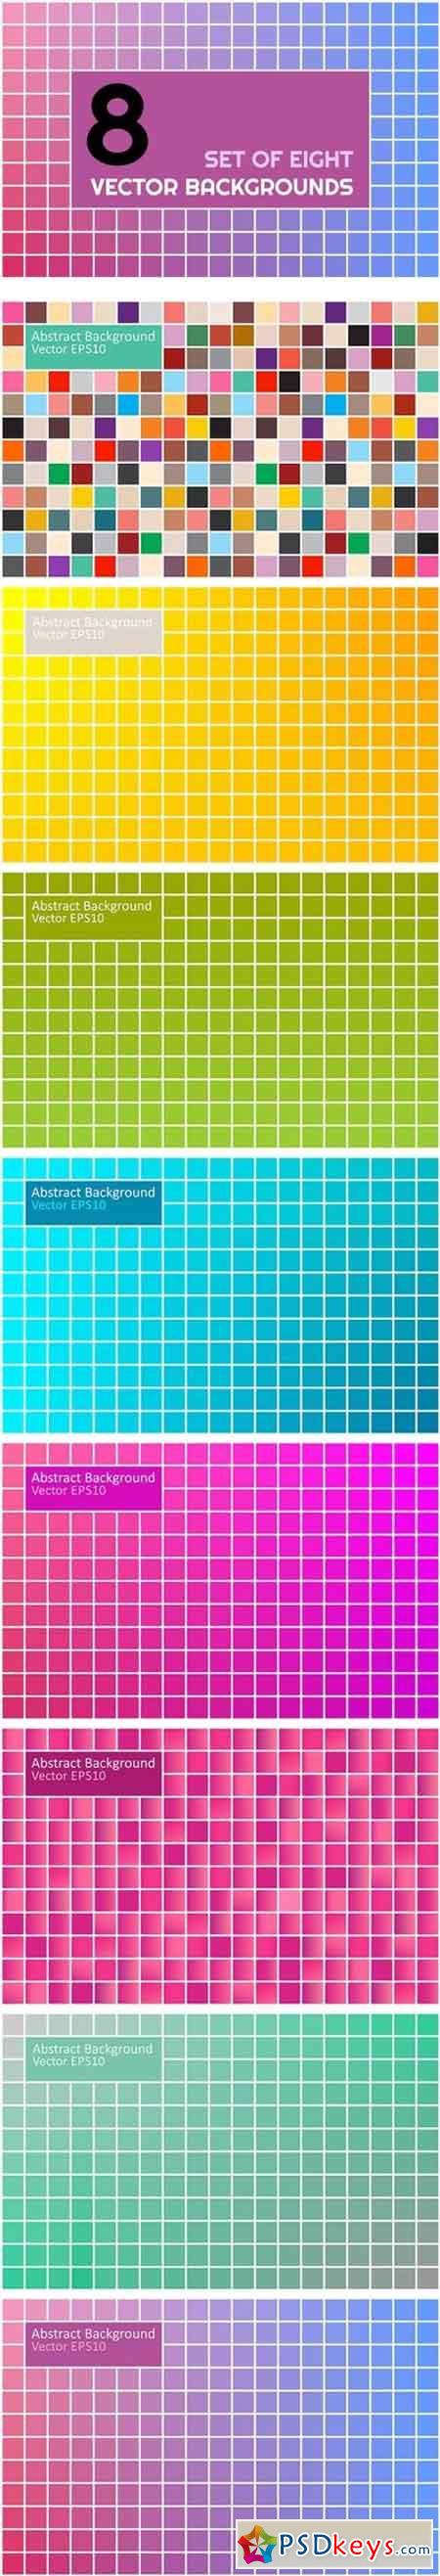 Set of 8 colorful vector backgrounds